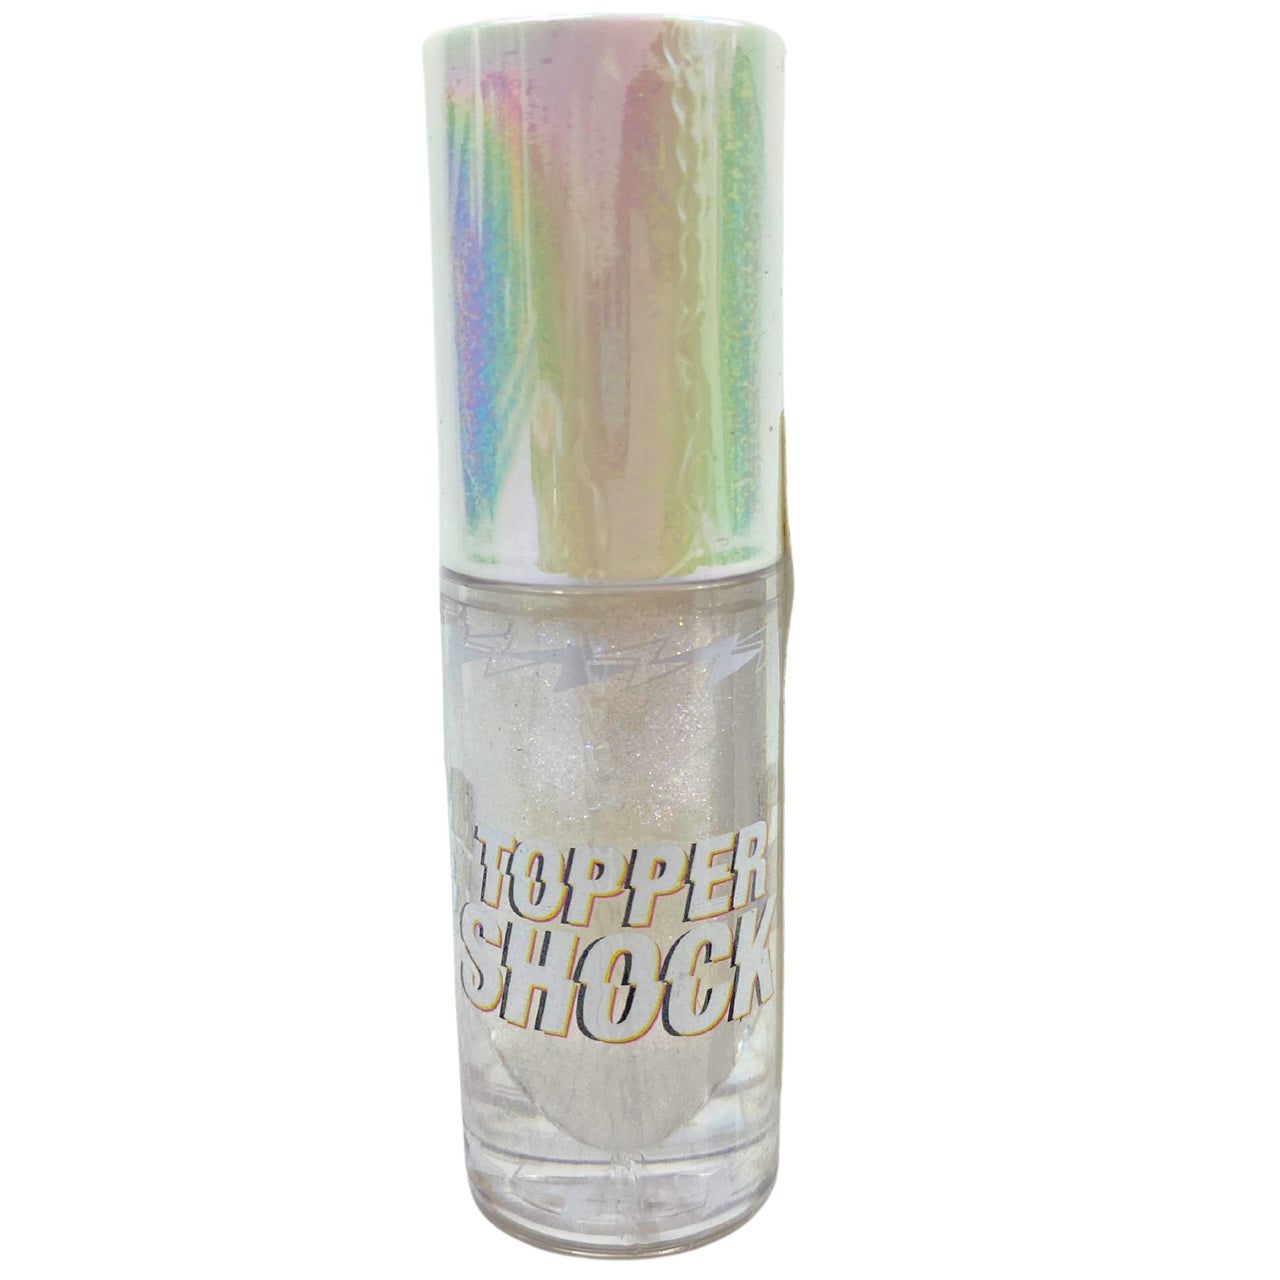 BH Cosmetics Topper Shock Poison Shock Holographic Lip Gloss